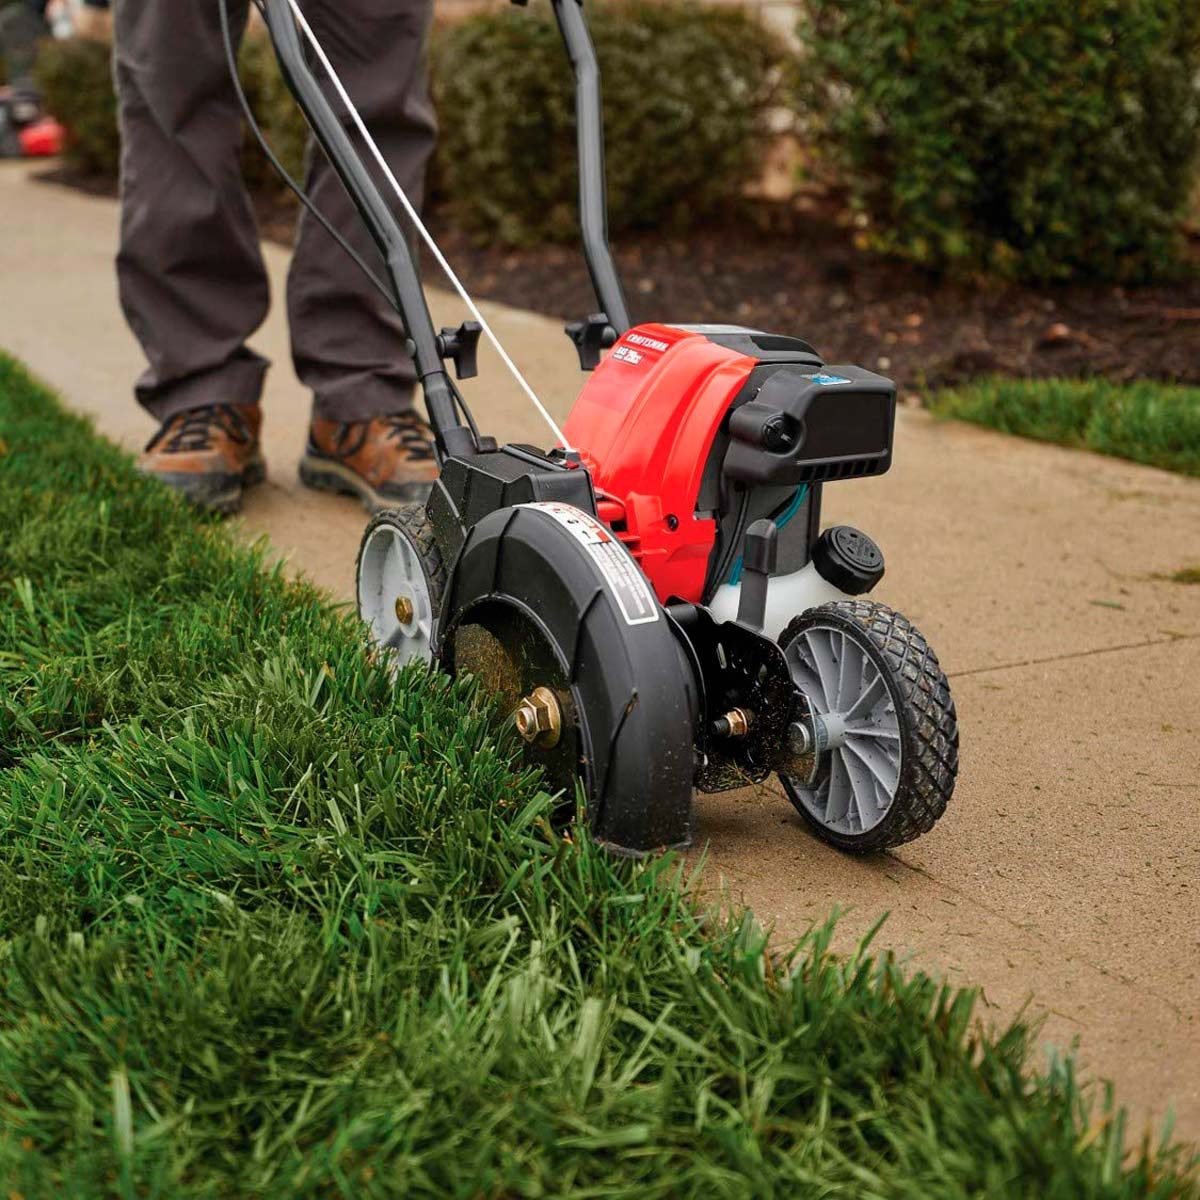 Best Lawn Edgers You Can Buy on Amazon | Family Handyman